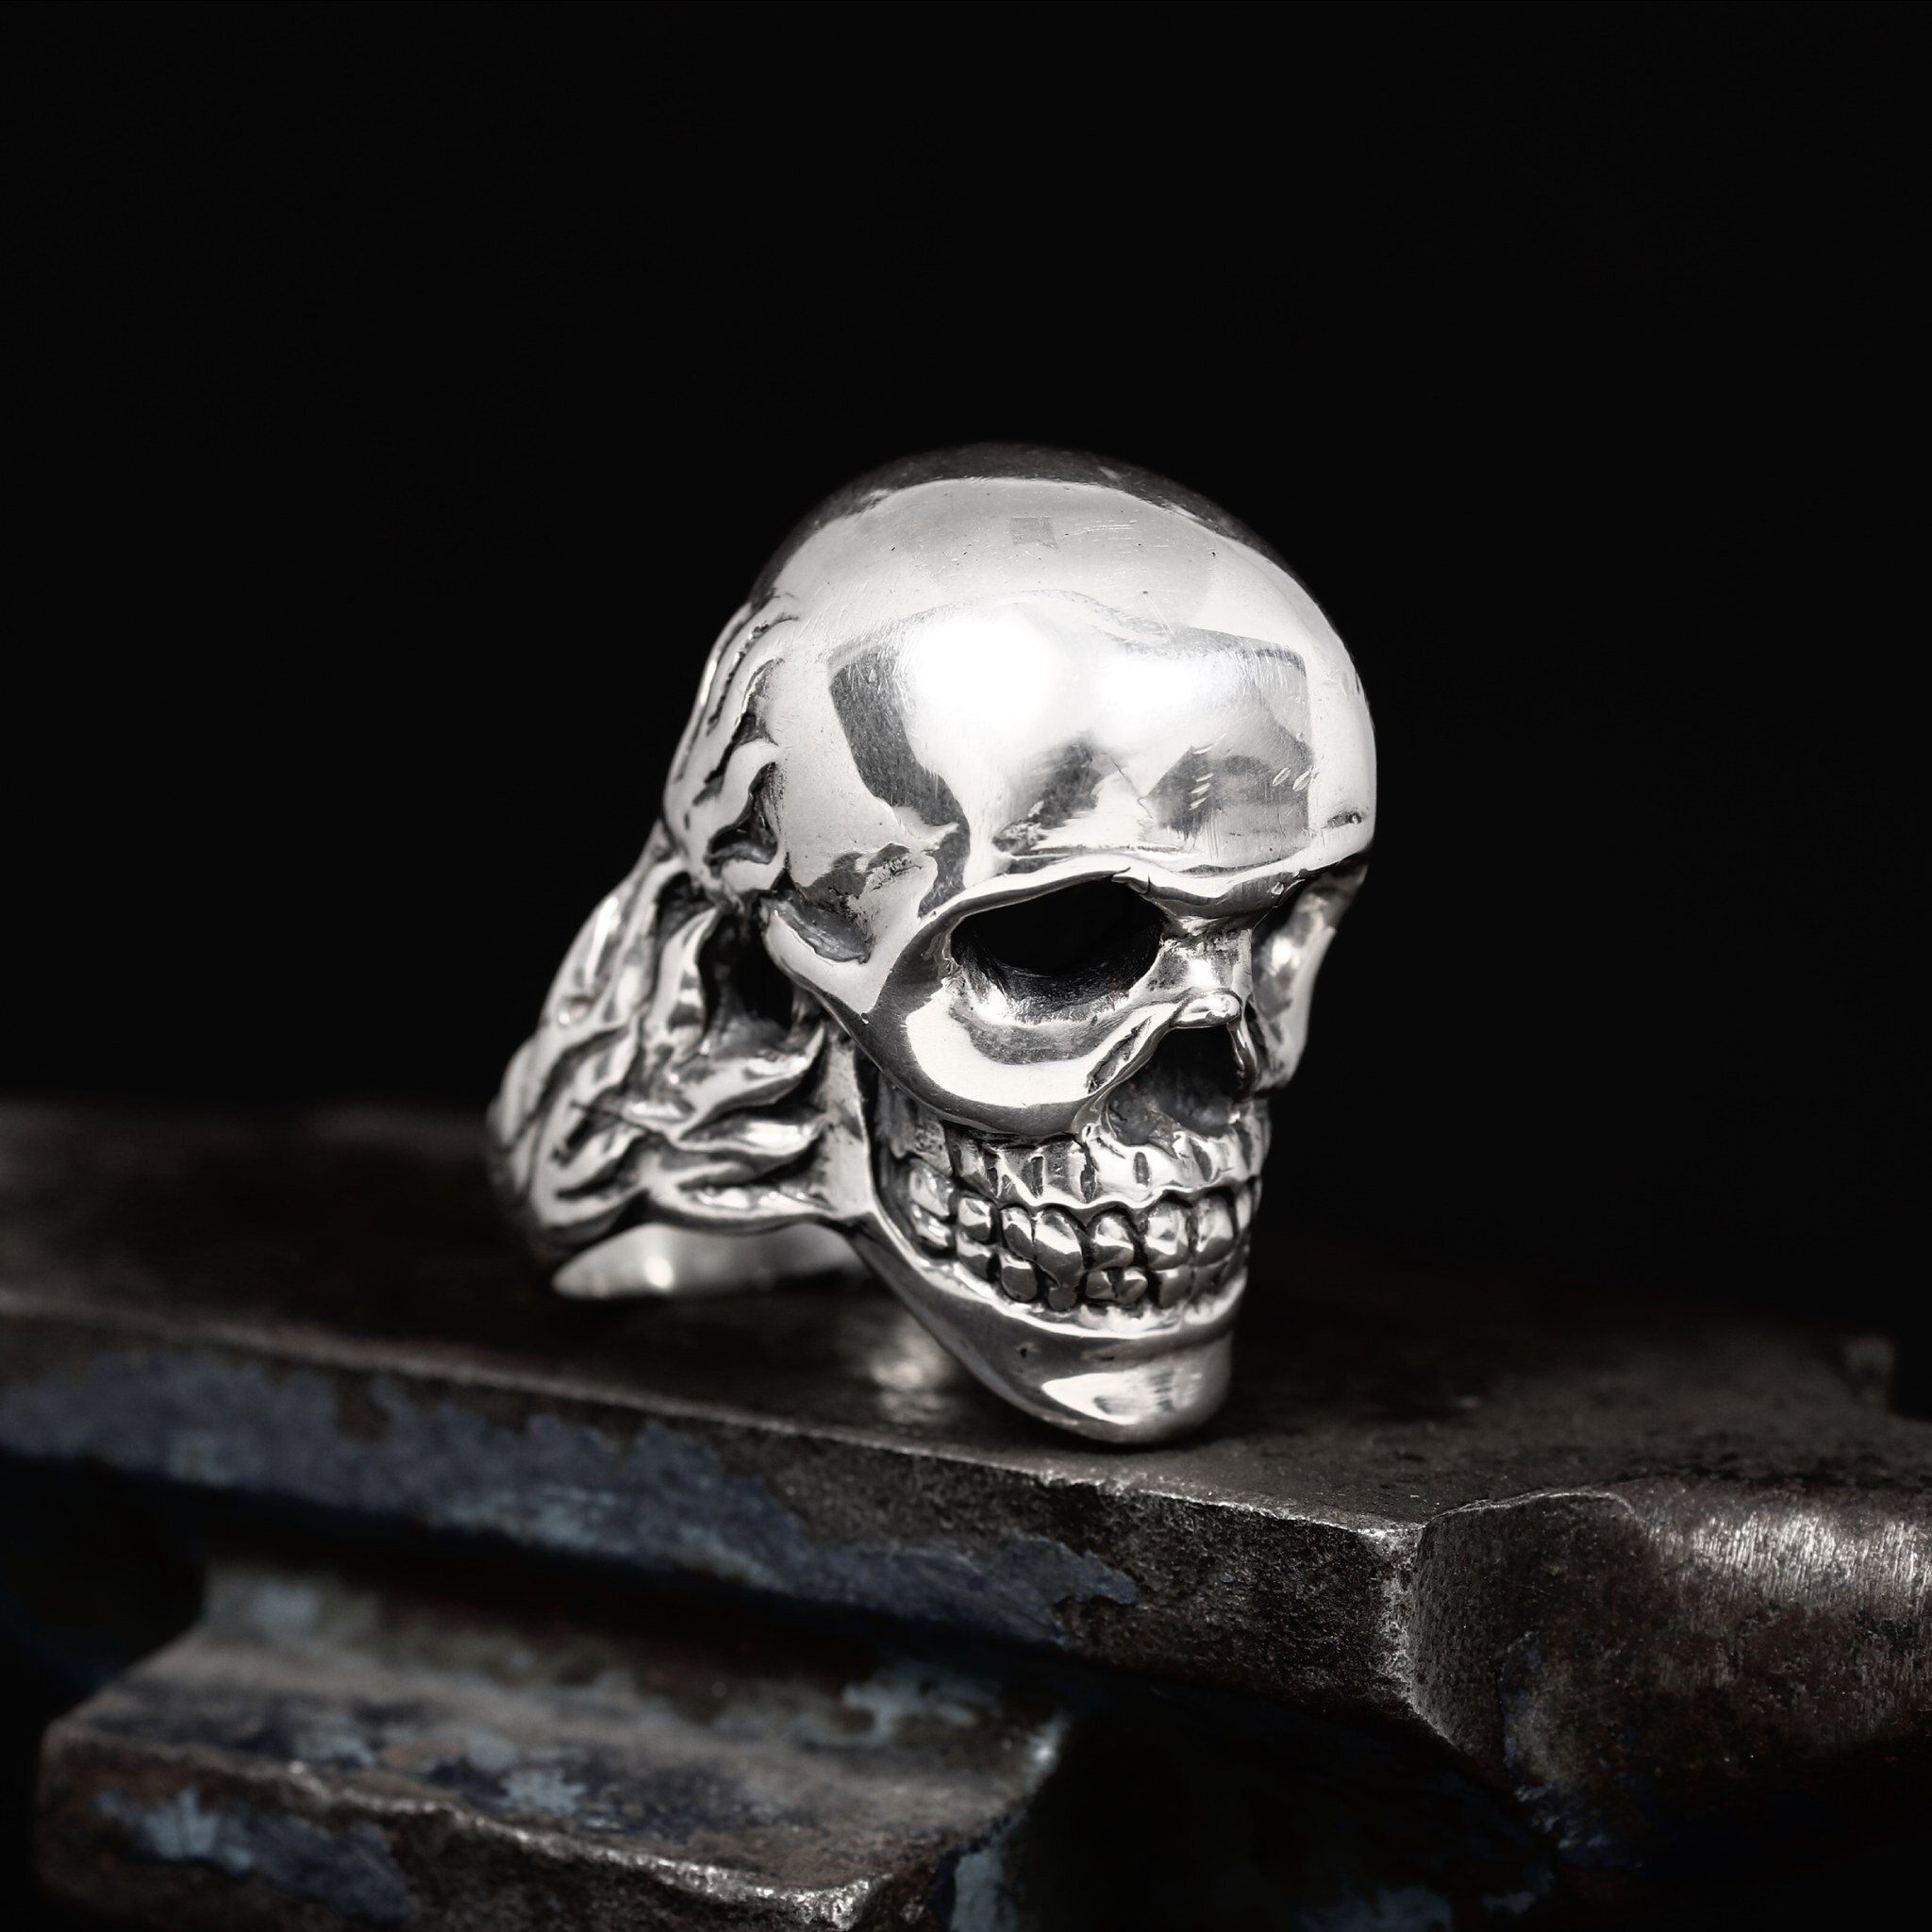 Solid skull ring sterling silver. And when I say solid, I mean it. At just over 80g (just under 8oz), this is one of the biggest rings in the collection. You could get our Demon Ring which comes in at about 10g heavier to balance yourself out on the 